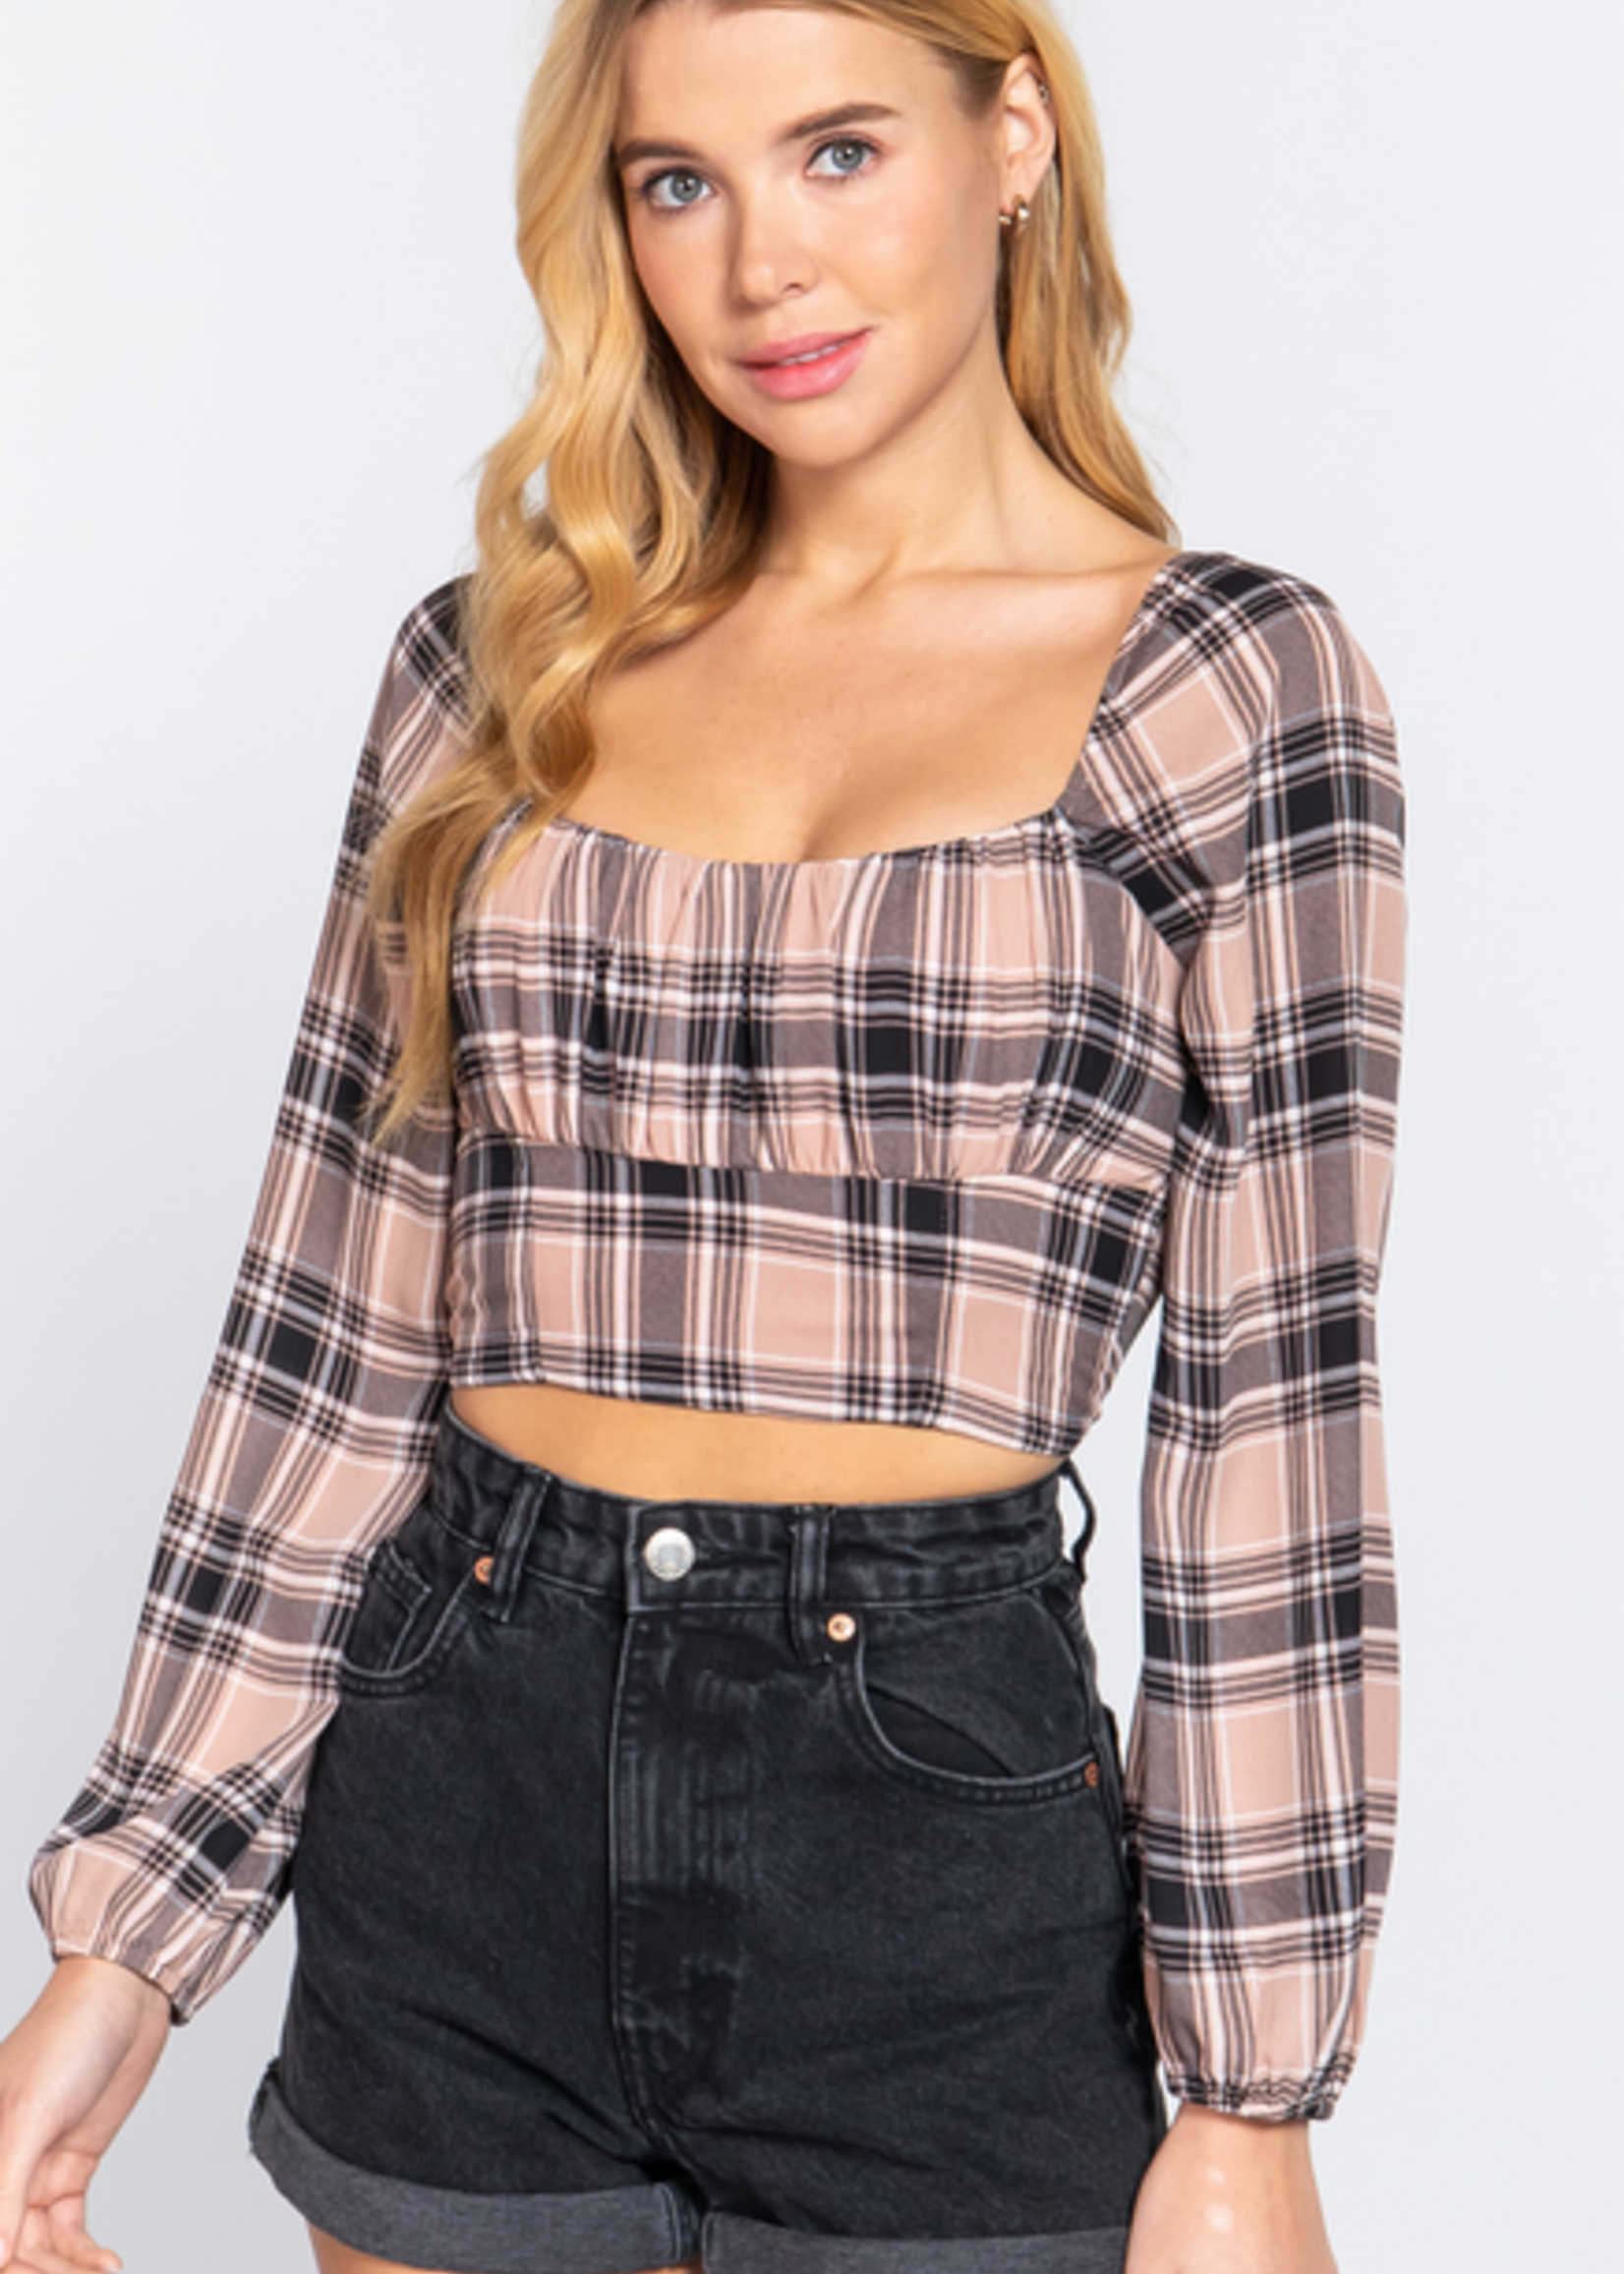 Active USA - Long Slv Plaid Print Woven Crop Top - T13218 - Oly's